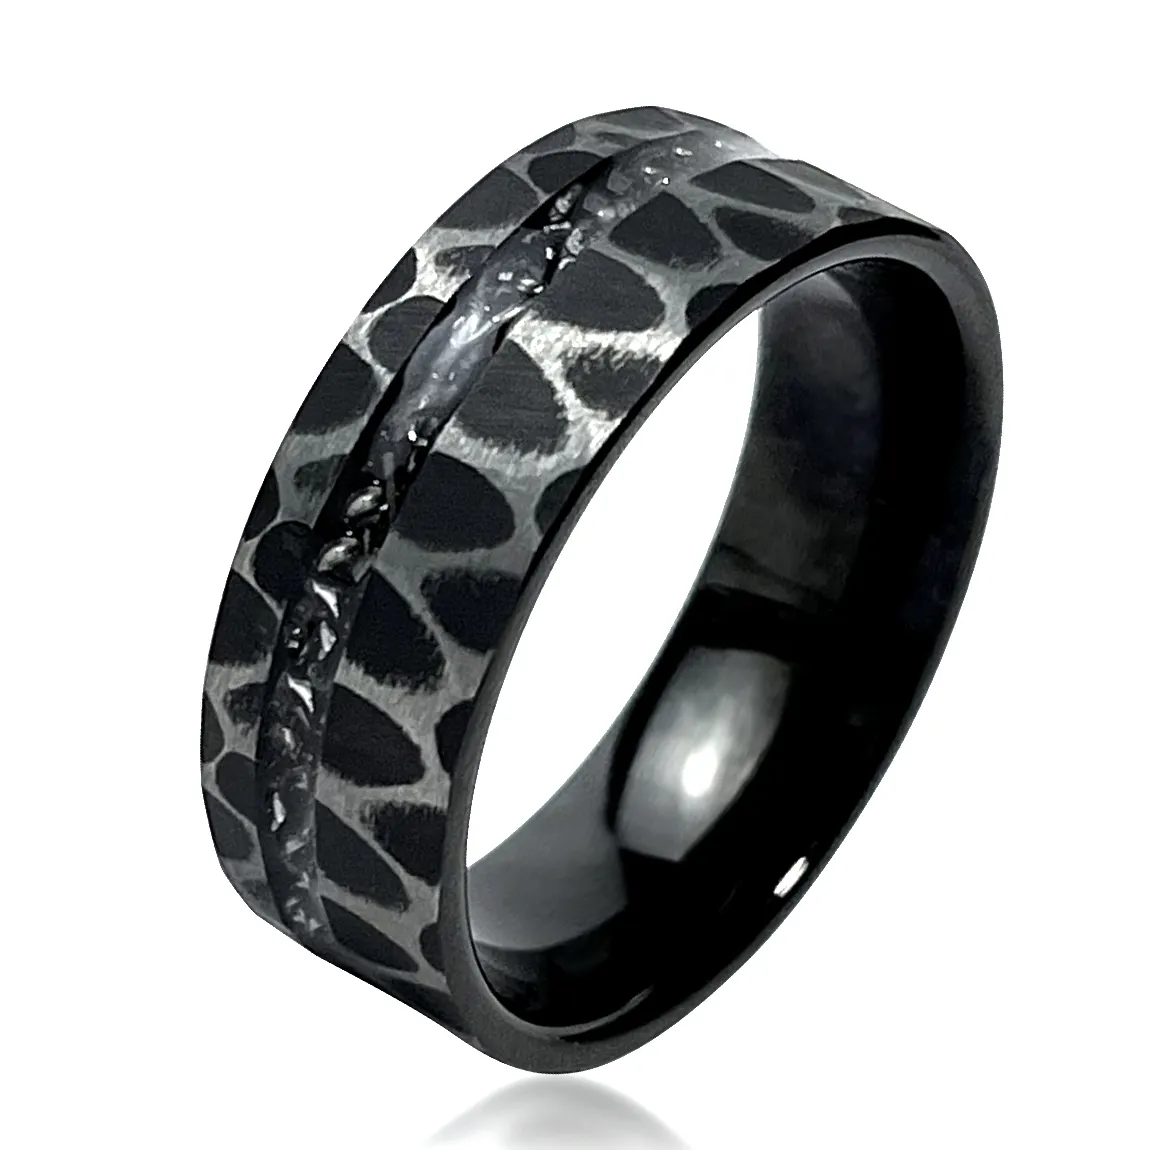 Golden Supplier Black 8mm Hammered Tungsten Carbide Ring Inlay Meteorite for Mens Women Fashion Wedding Band Rings Jewelry Gift